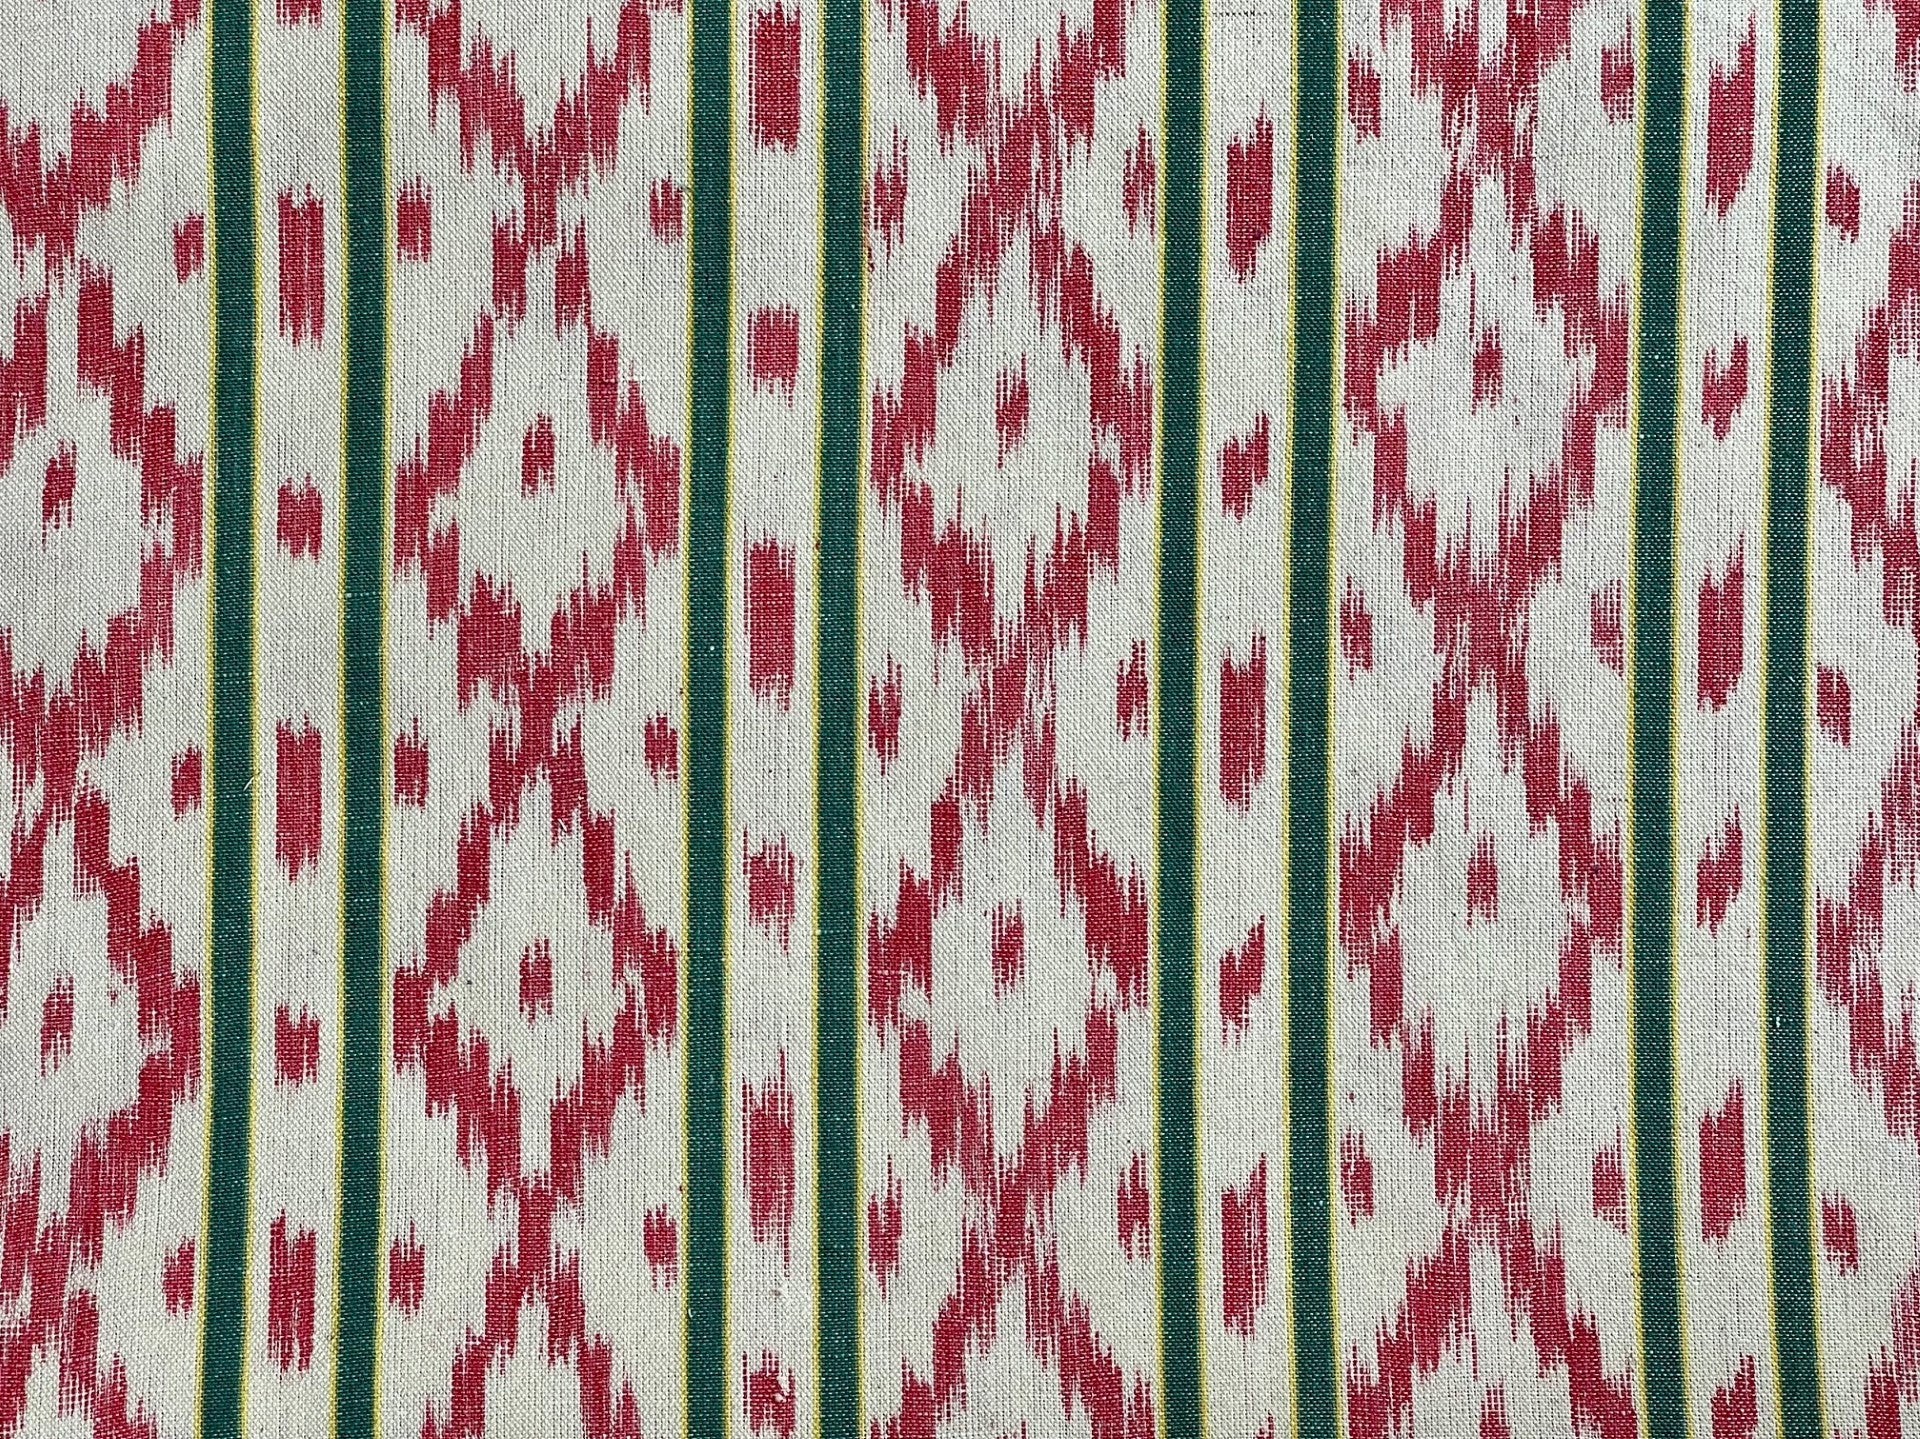 BUJOSA FABRIC - GREEN & YELLOW STRIPES WITH RED CHEVRON